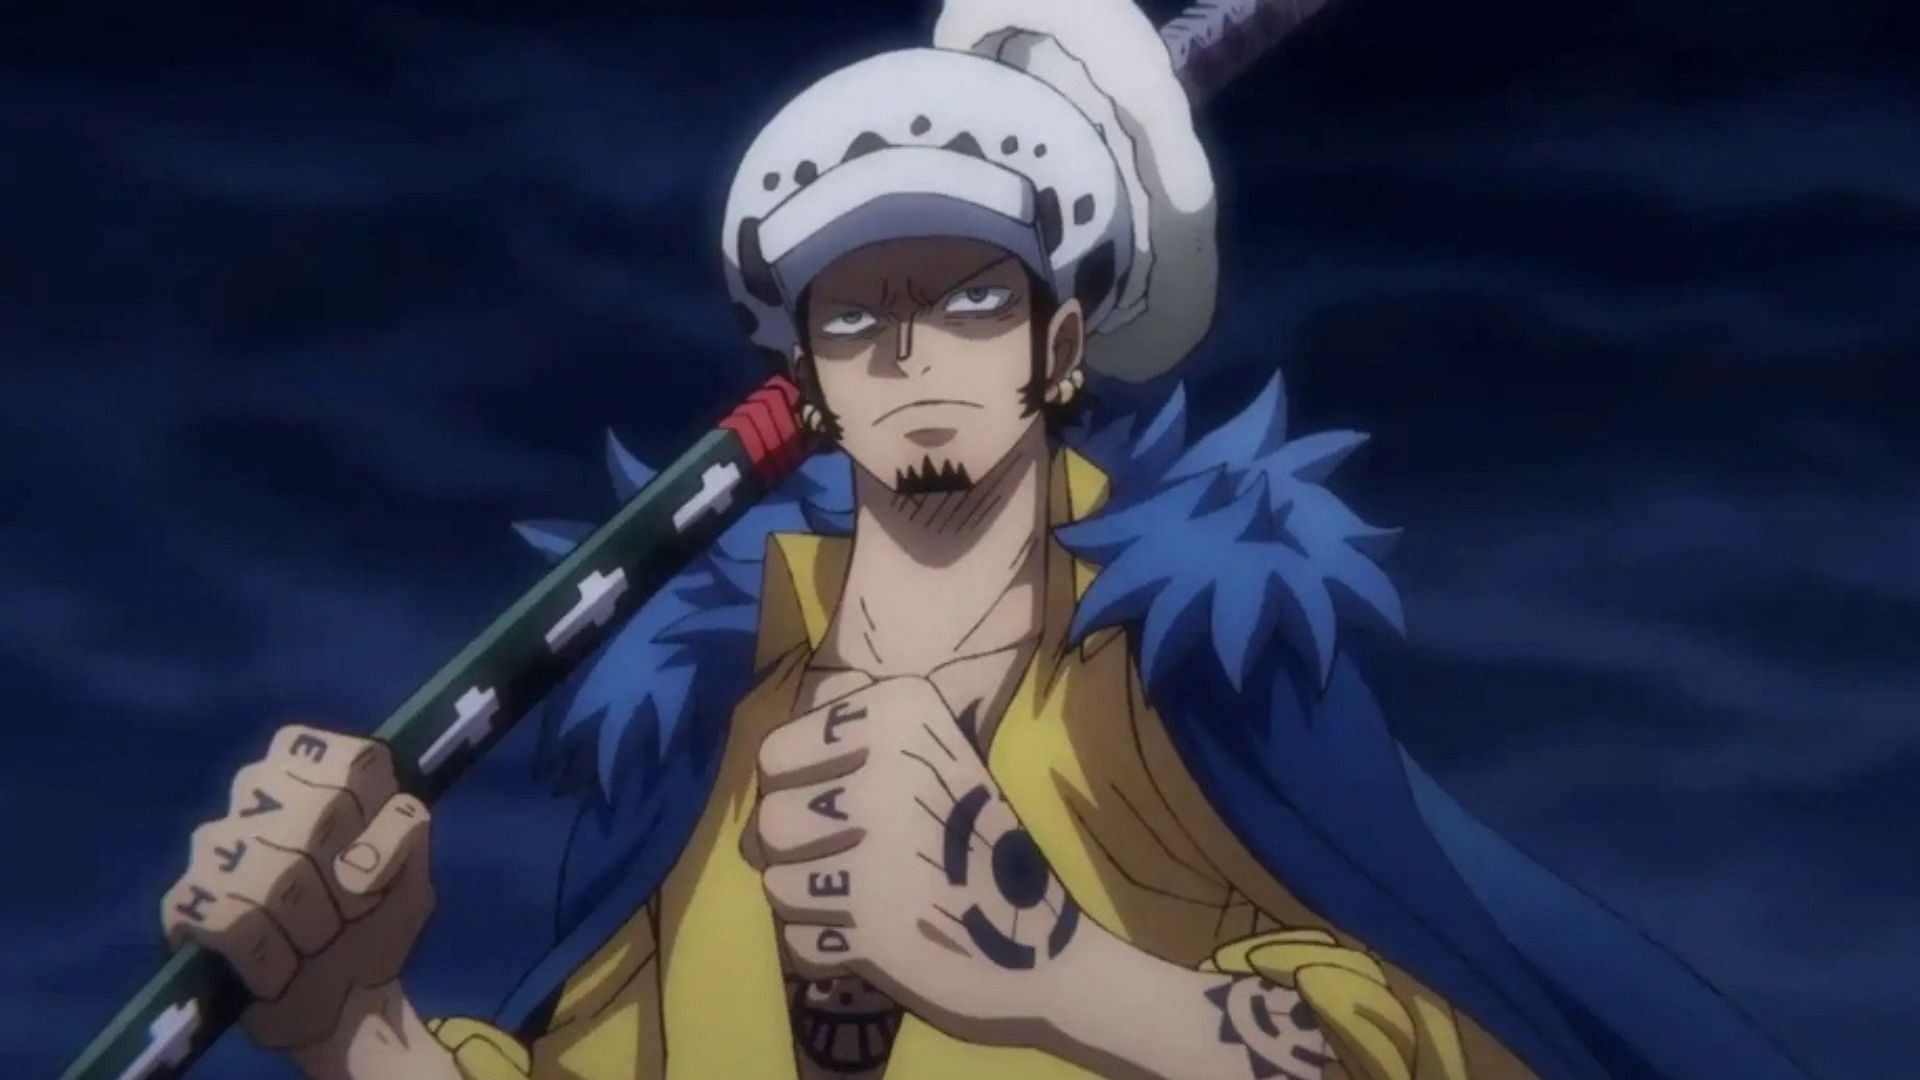 Law as seen in One Piece anime (Image via Toei Animation)